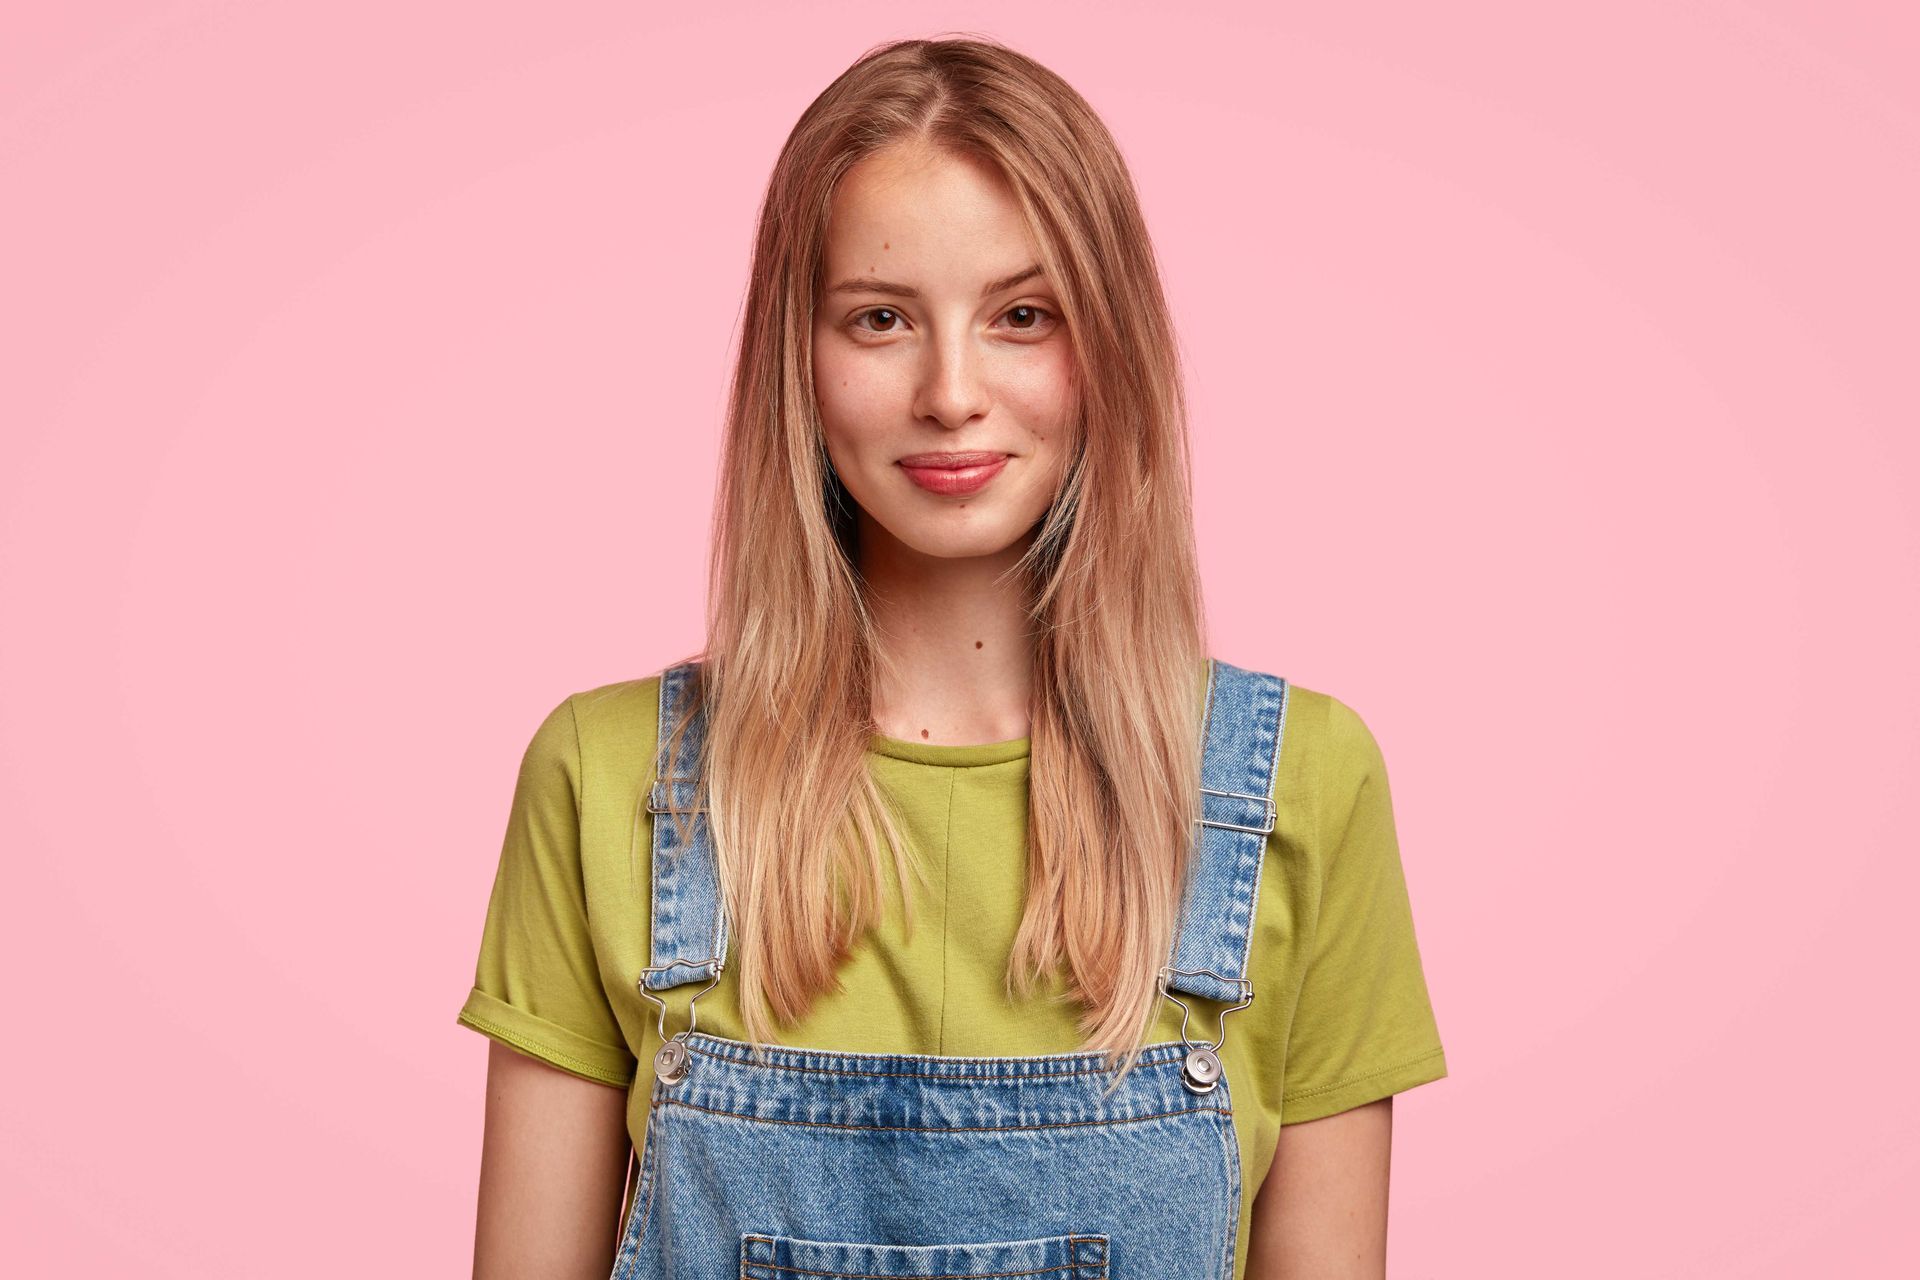 A Texas woman with jean overalls over top of a pastel green t-shirt